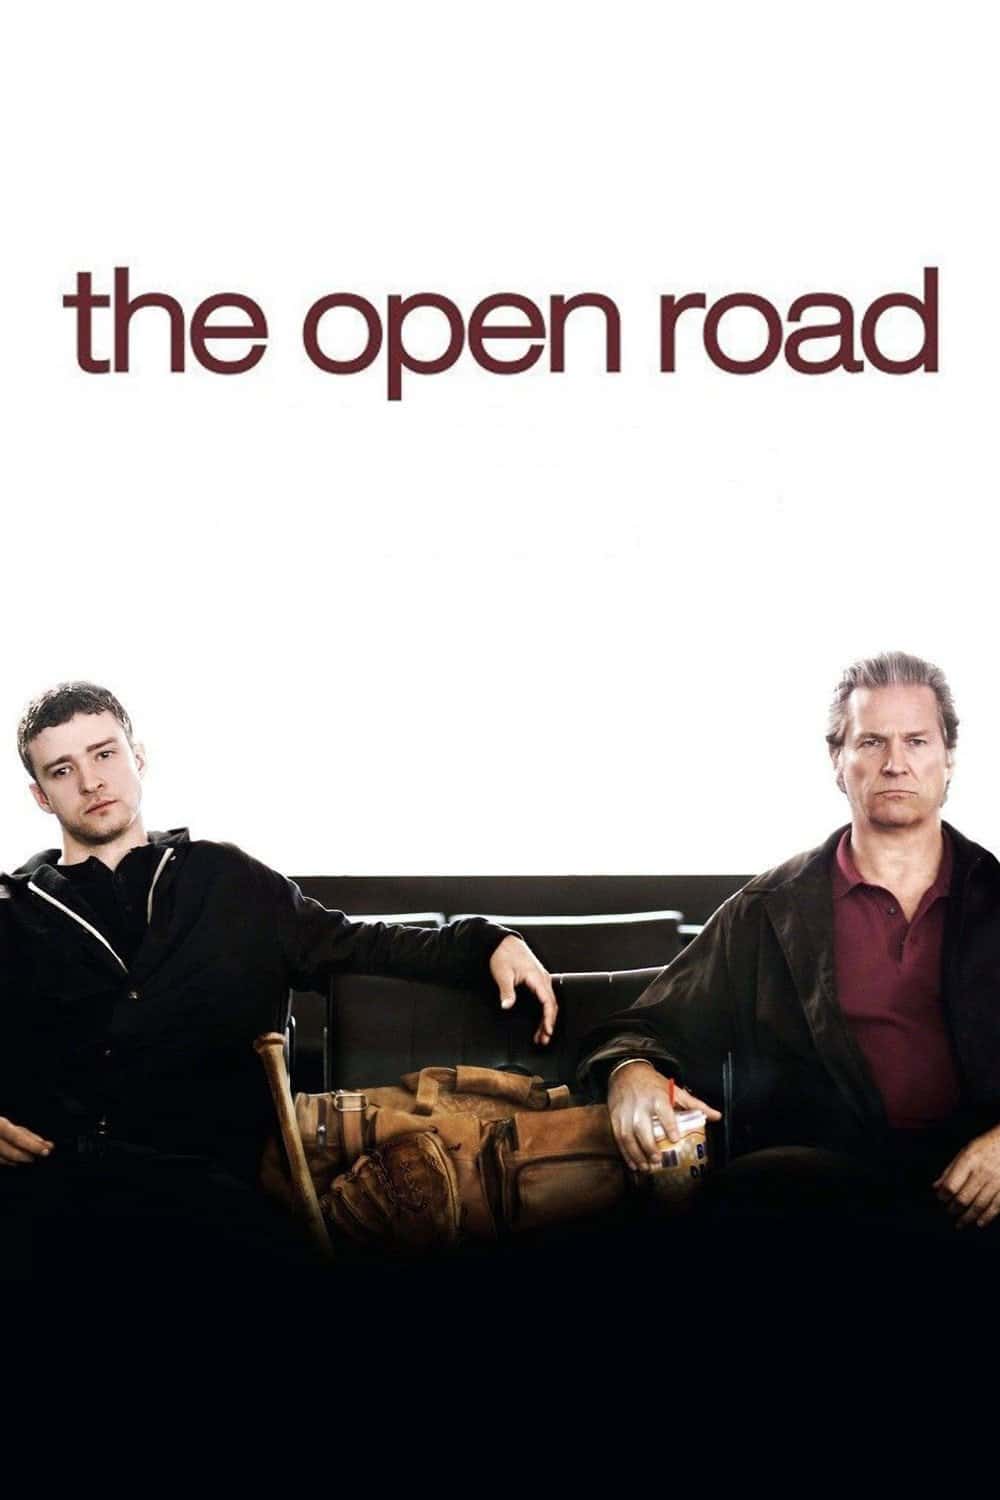 The Open Road, 2009 